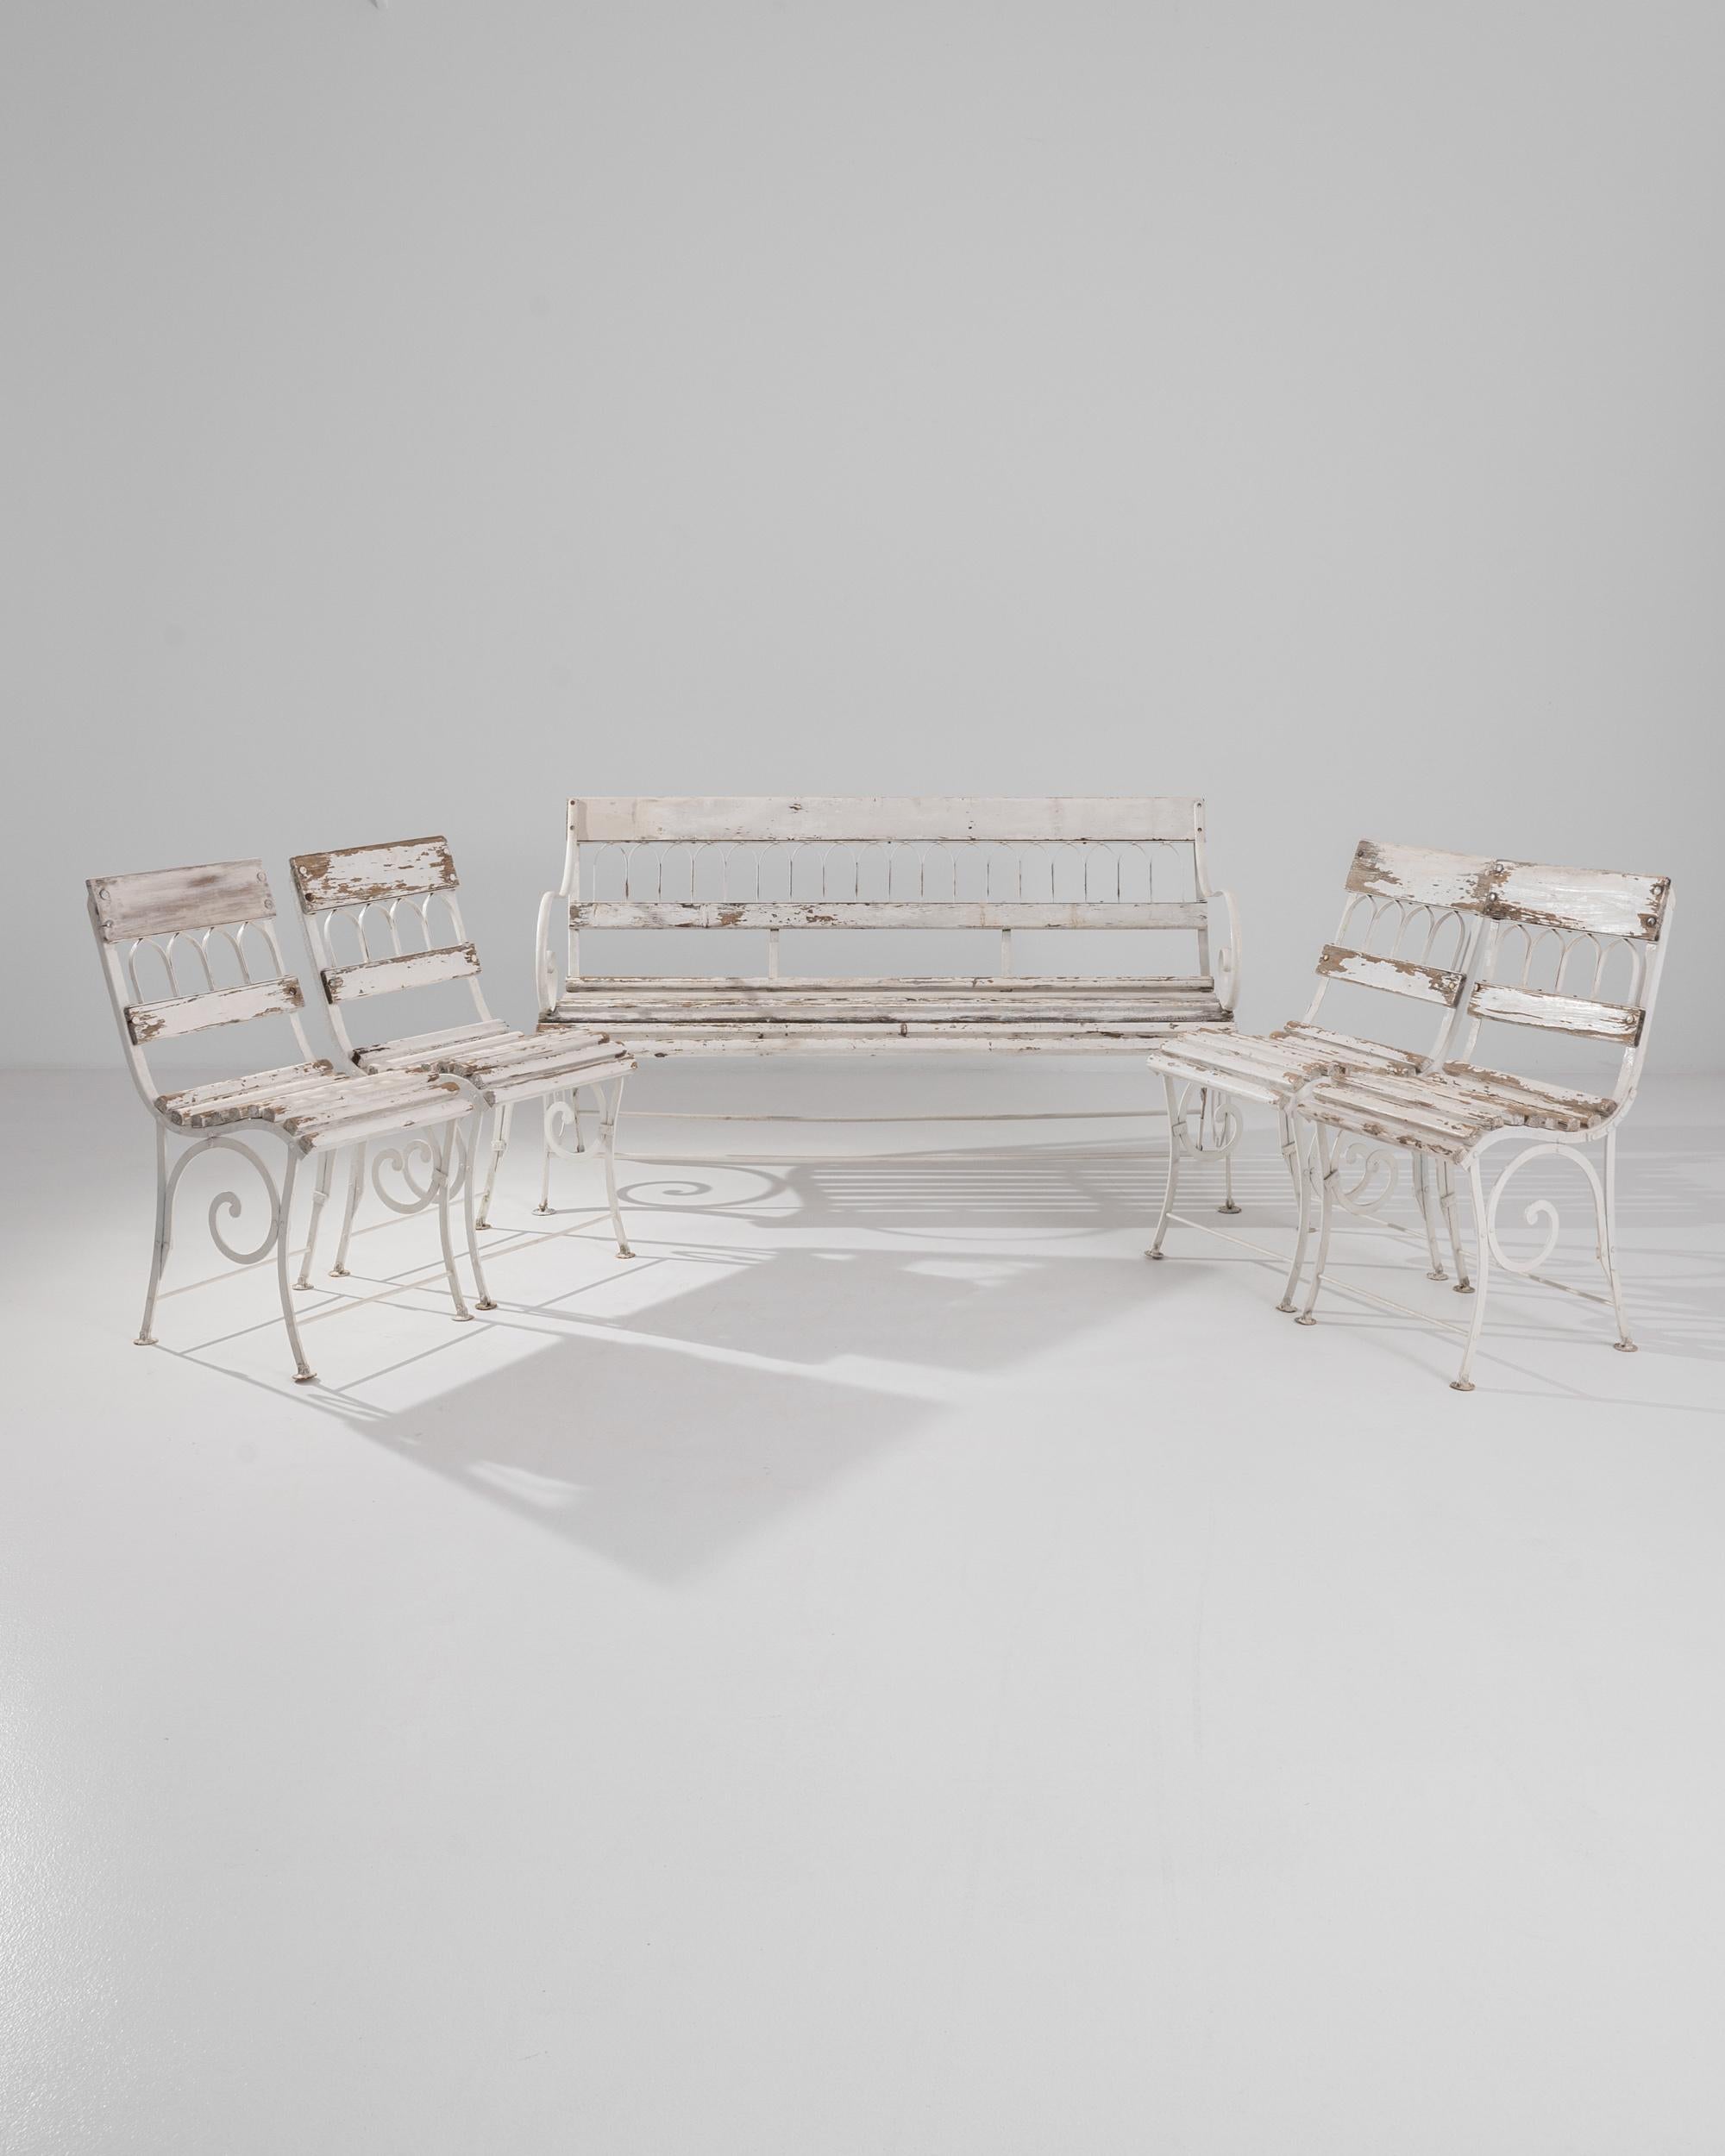 An early 20th century bench and set of four armchairs from France. Brilliant and bright wood tones shine between the cracks in a patinated cream-white coat of paint. Arching metal seat backs and spiraling leg braces suggest a refined taste, affected